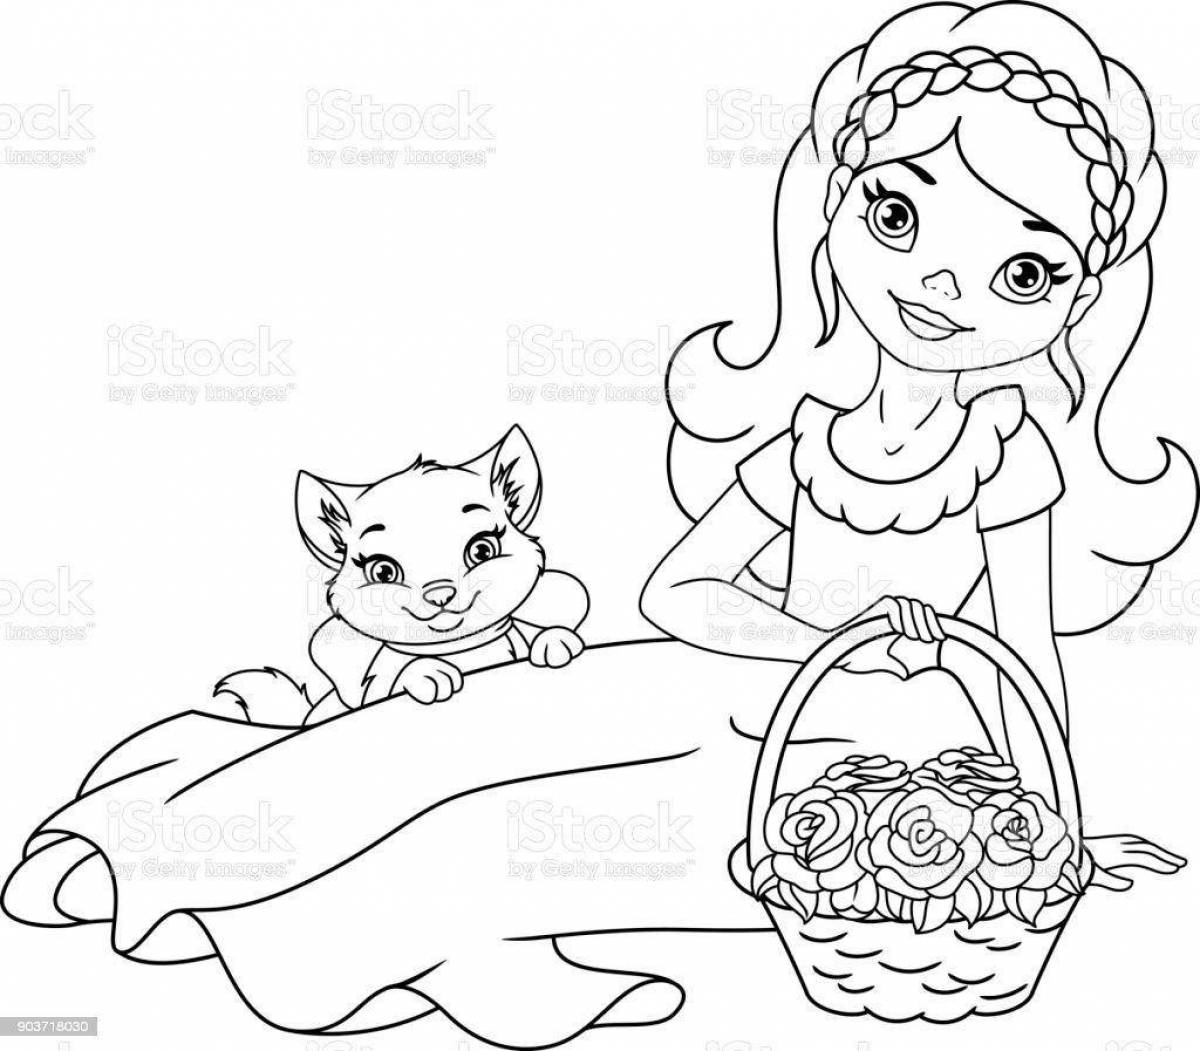 Witty barbie coloring book with kitten